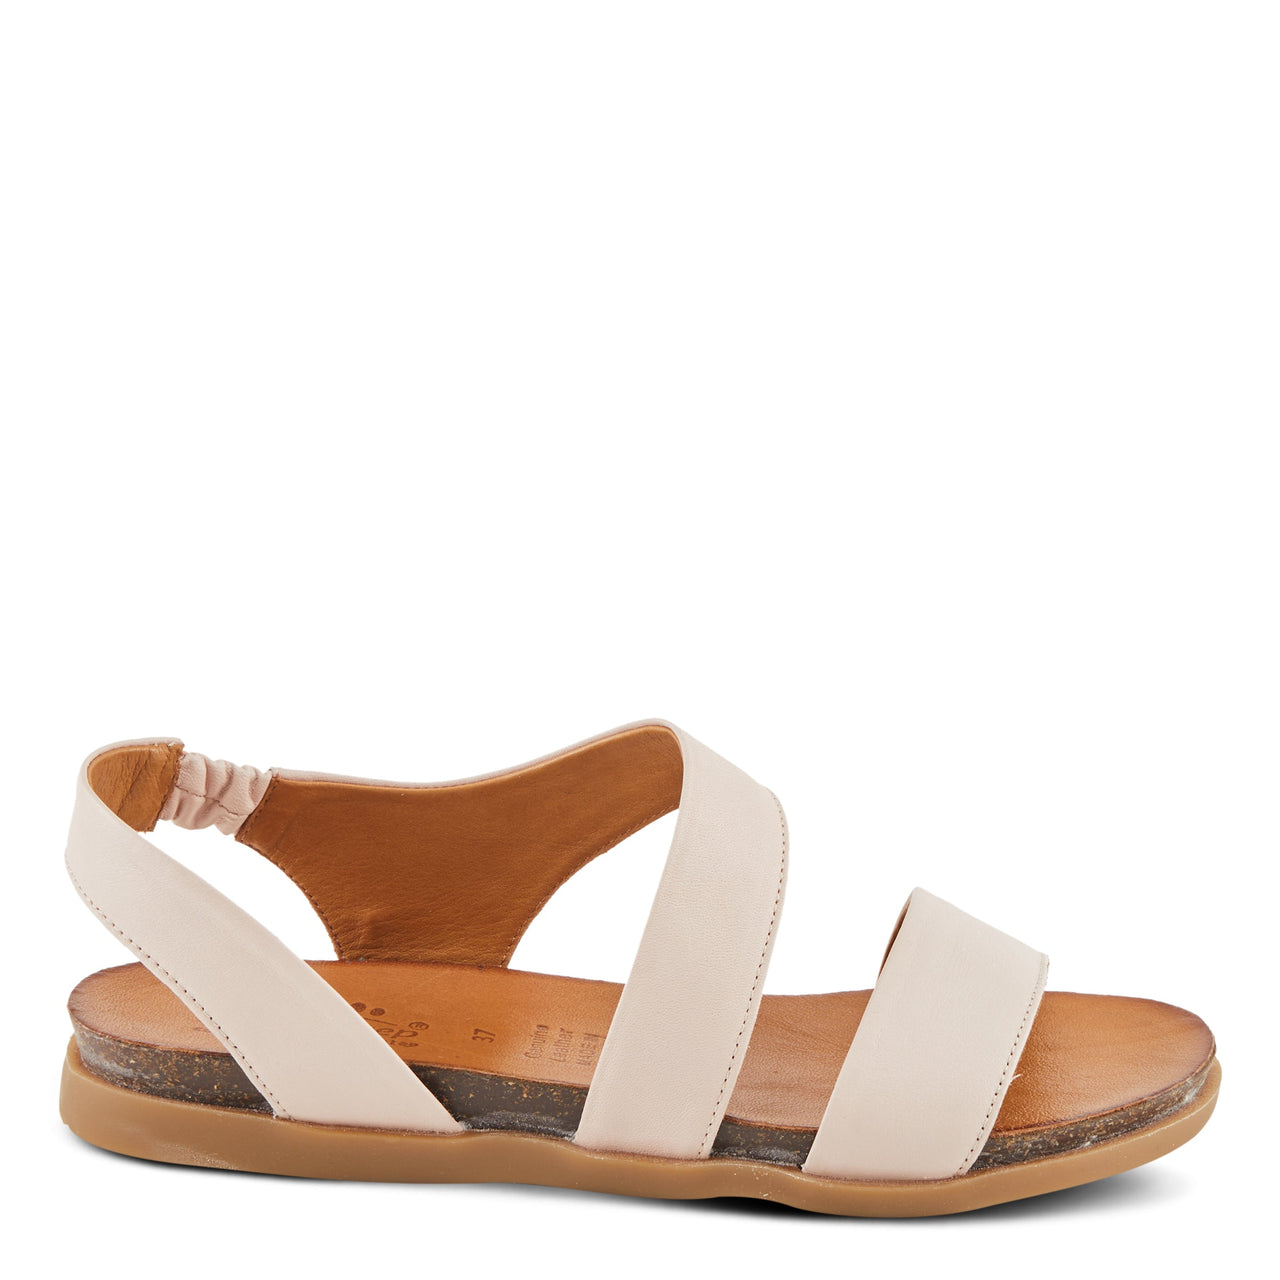 Beautifully crafted Spring Step Besitos sandals featuring comfortable cushioned footbed and stylish leather straps